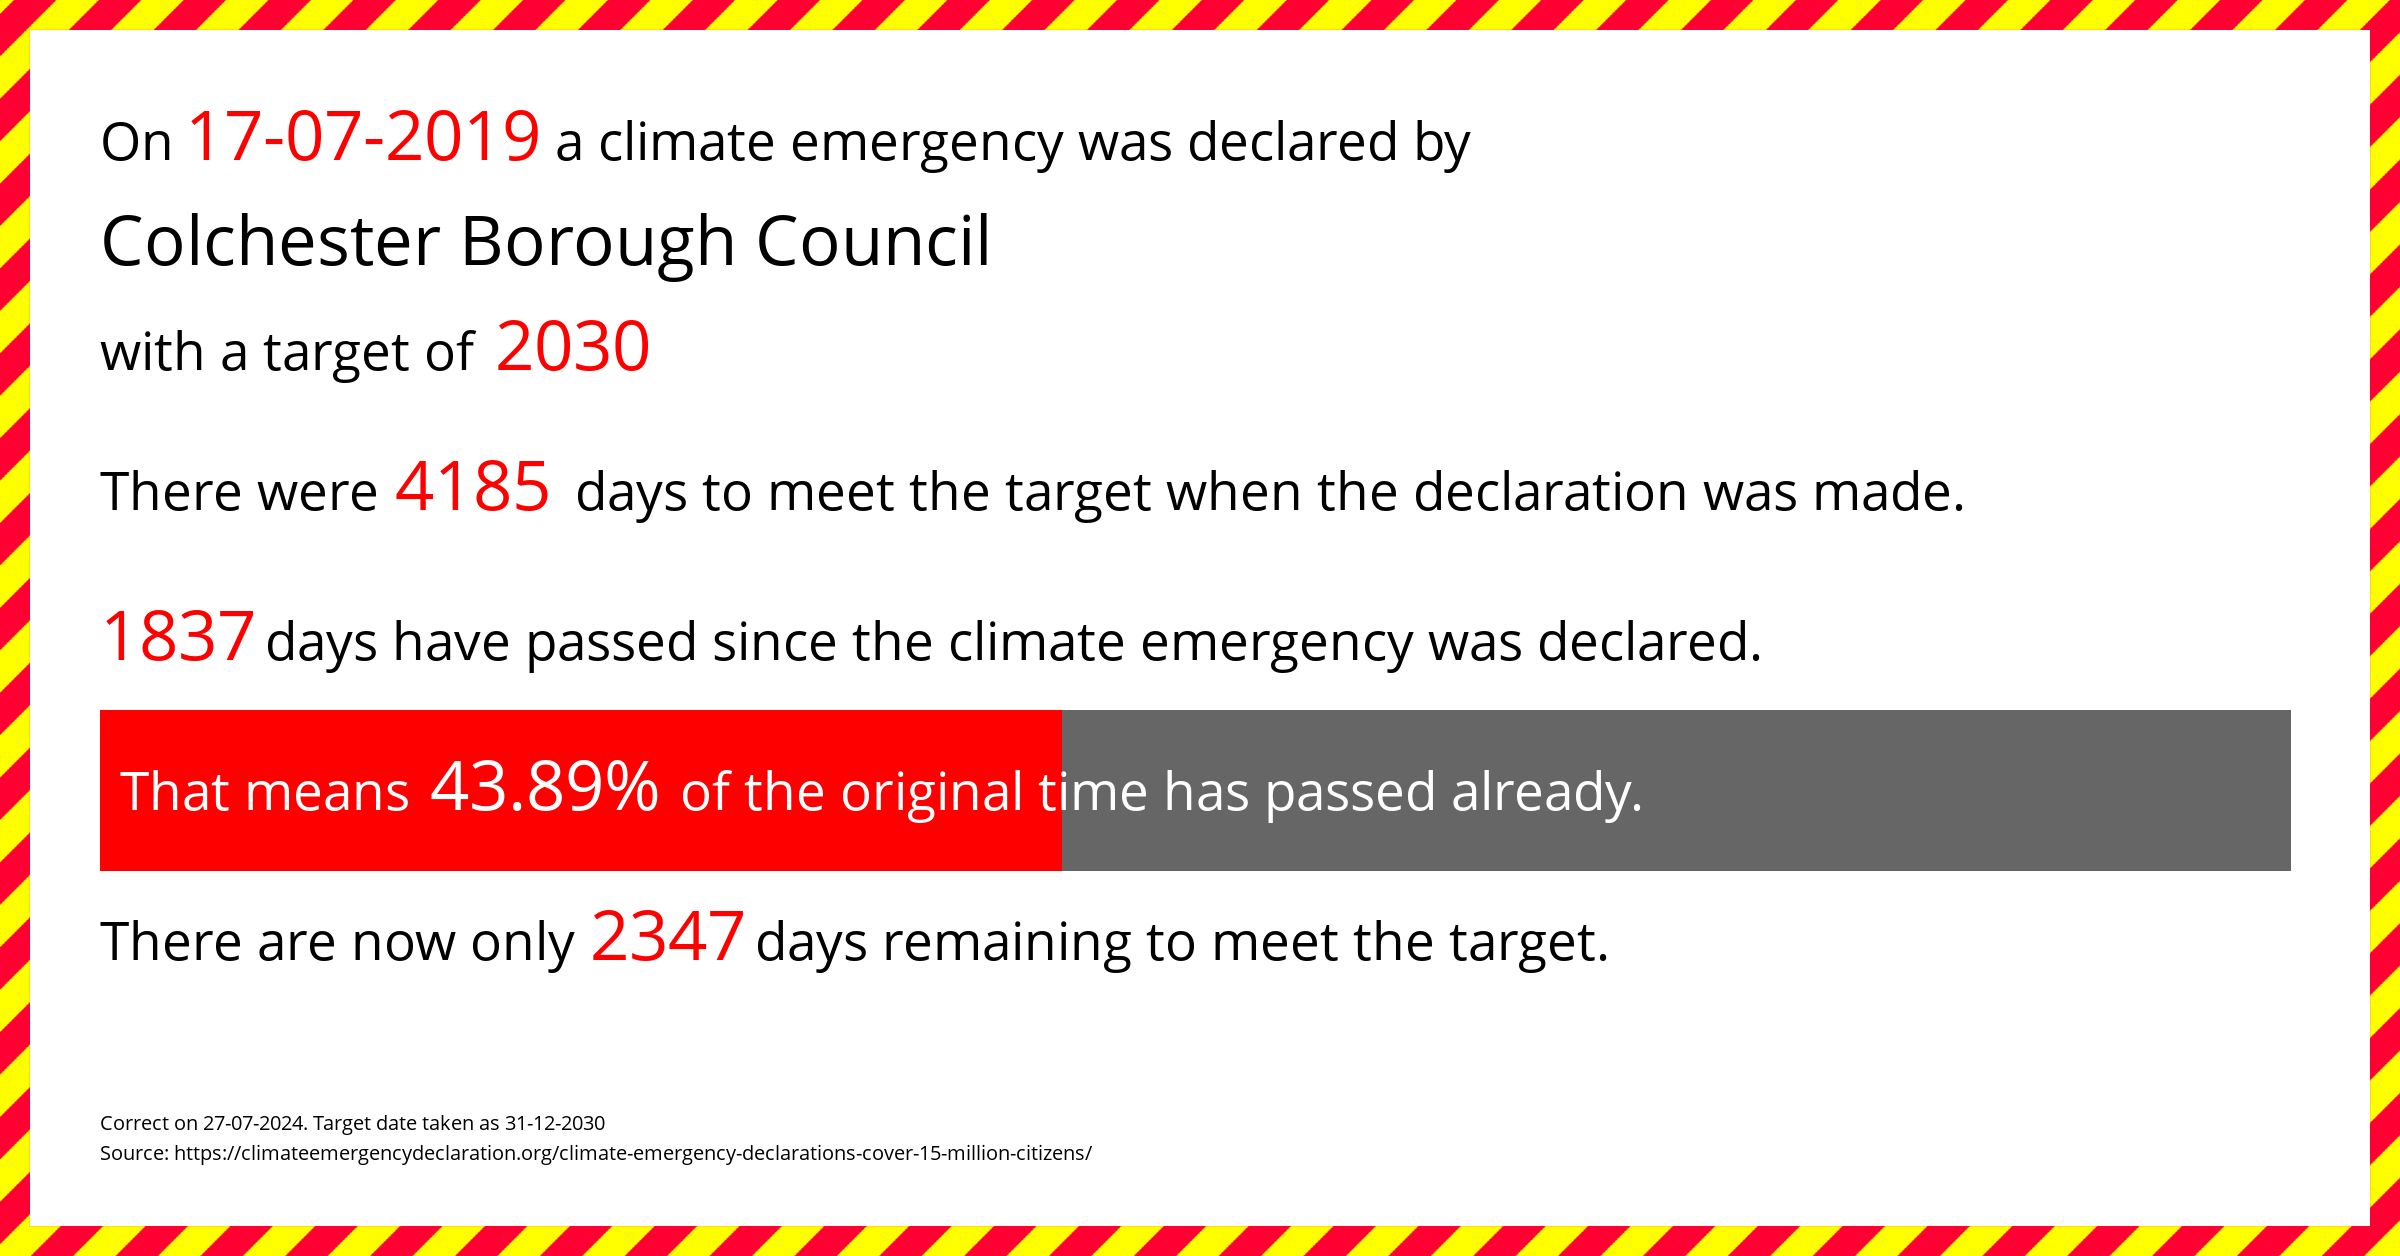 Colchester Borough Council declared a Climate emergency on Wednesday 17th July 2019, with a target of 2030.